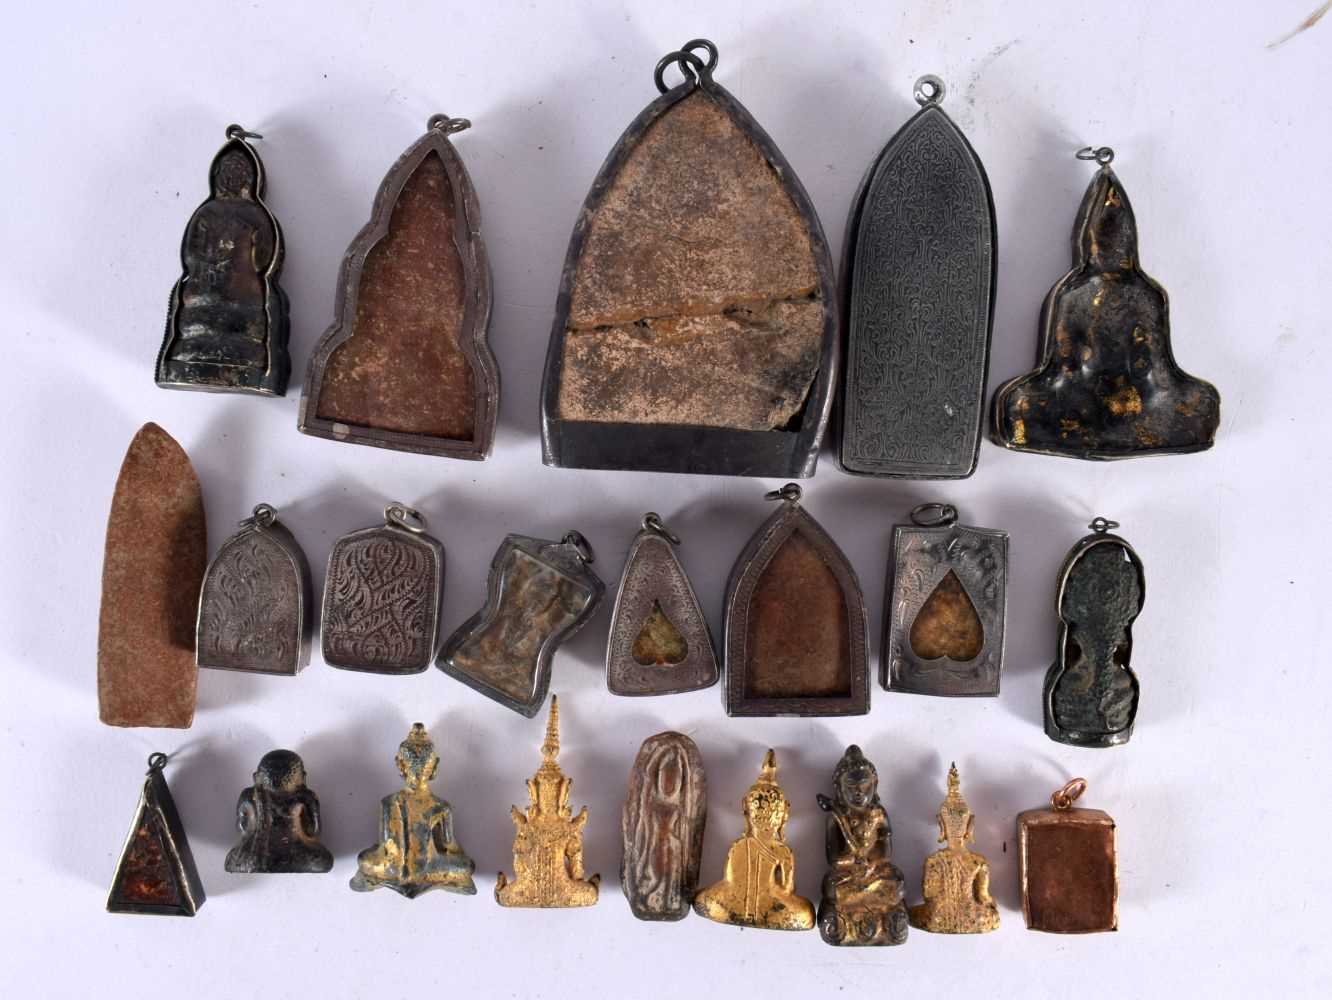 A GROUP OF 18TH/19TH CENTURY SOUTHEAST ASIAN BRONZE BUDDHA PLAQUES in various forms and sizes. - Image 8 of 8